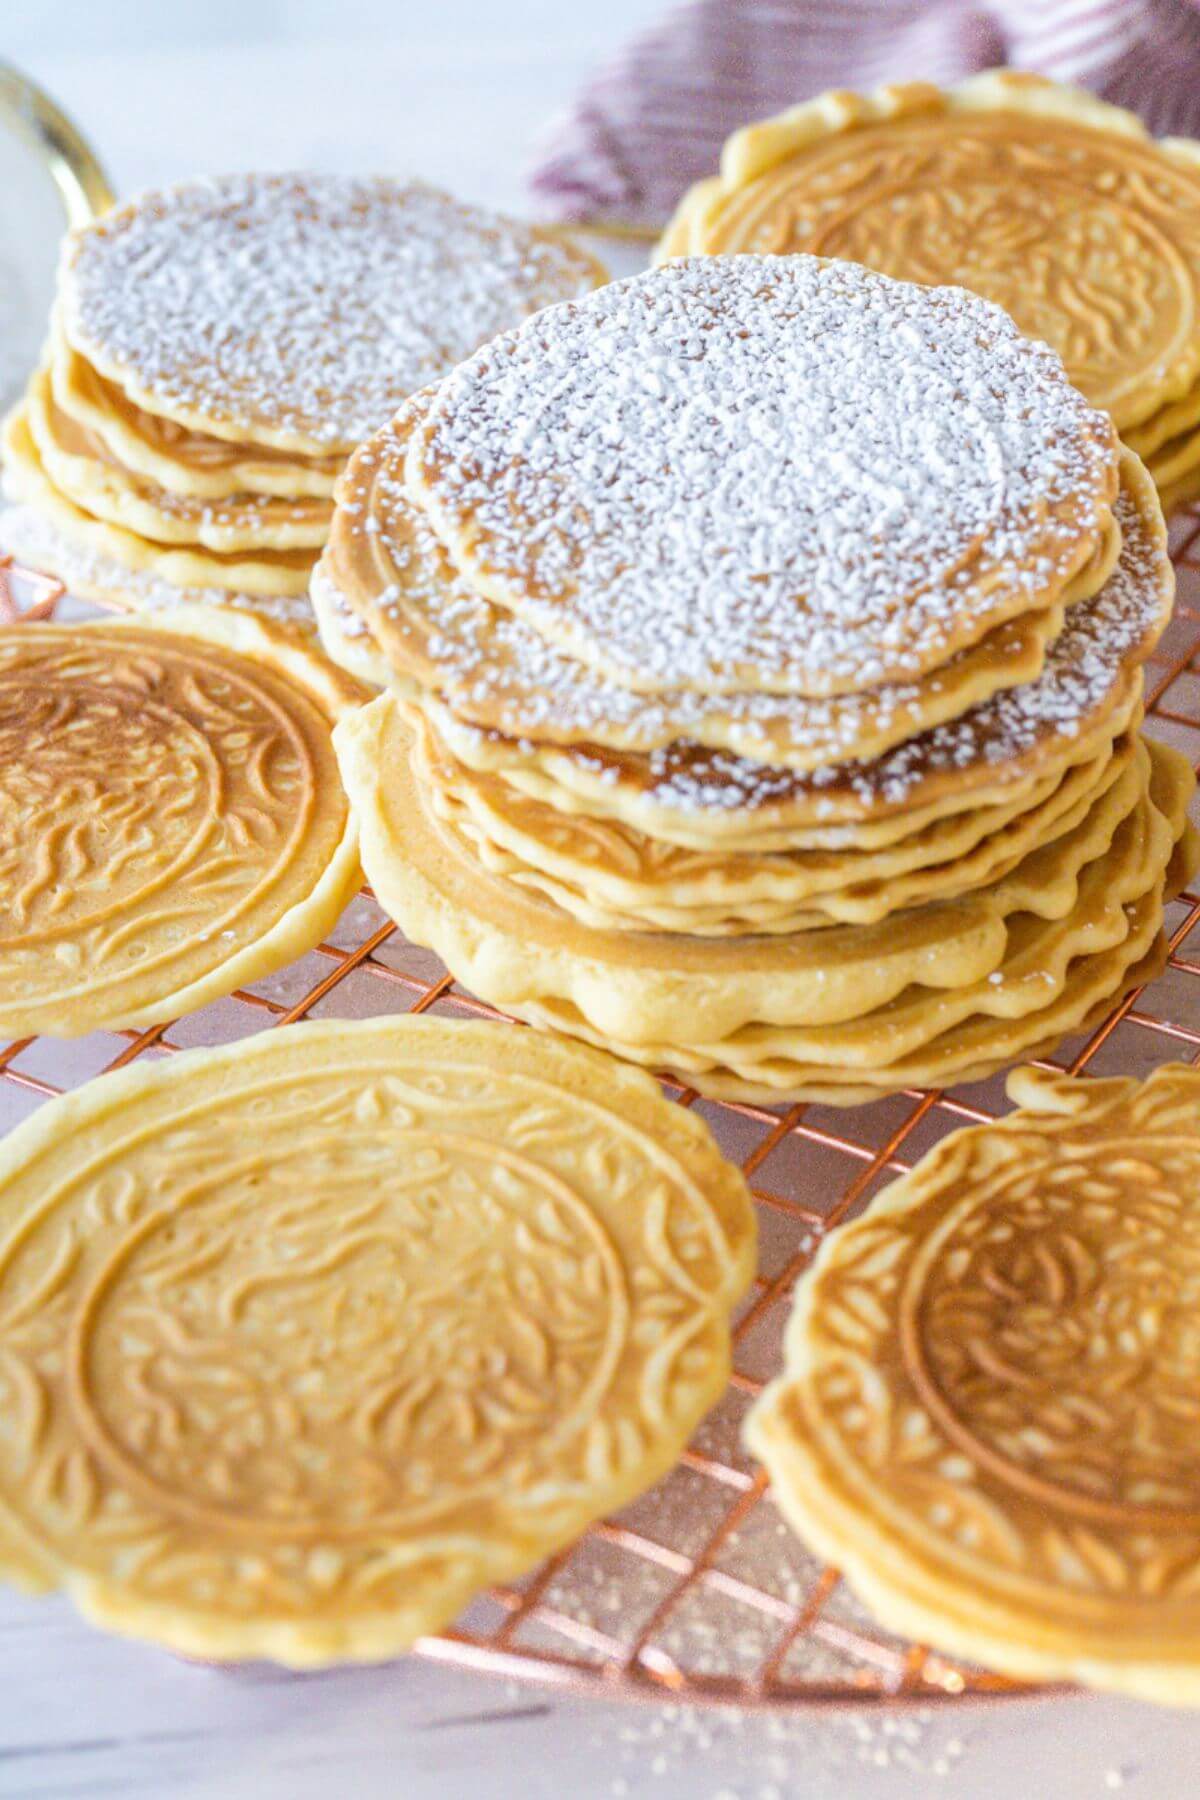 A close up view shows detail on Pizzelle cookies and powdered sugar on top.